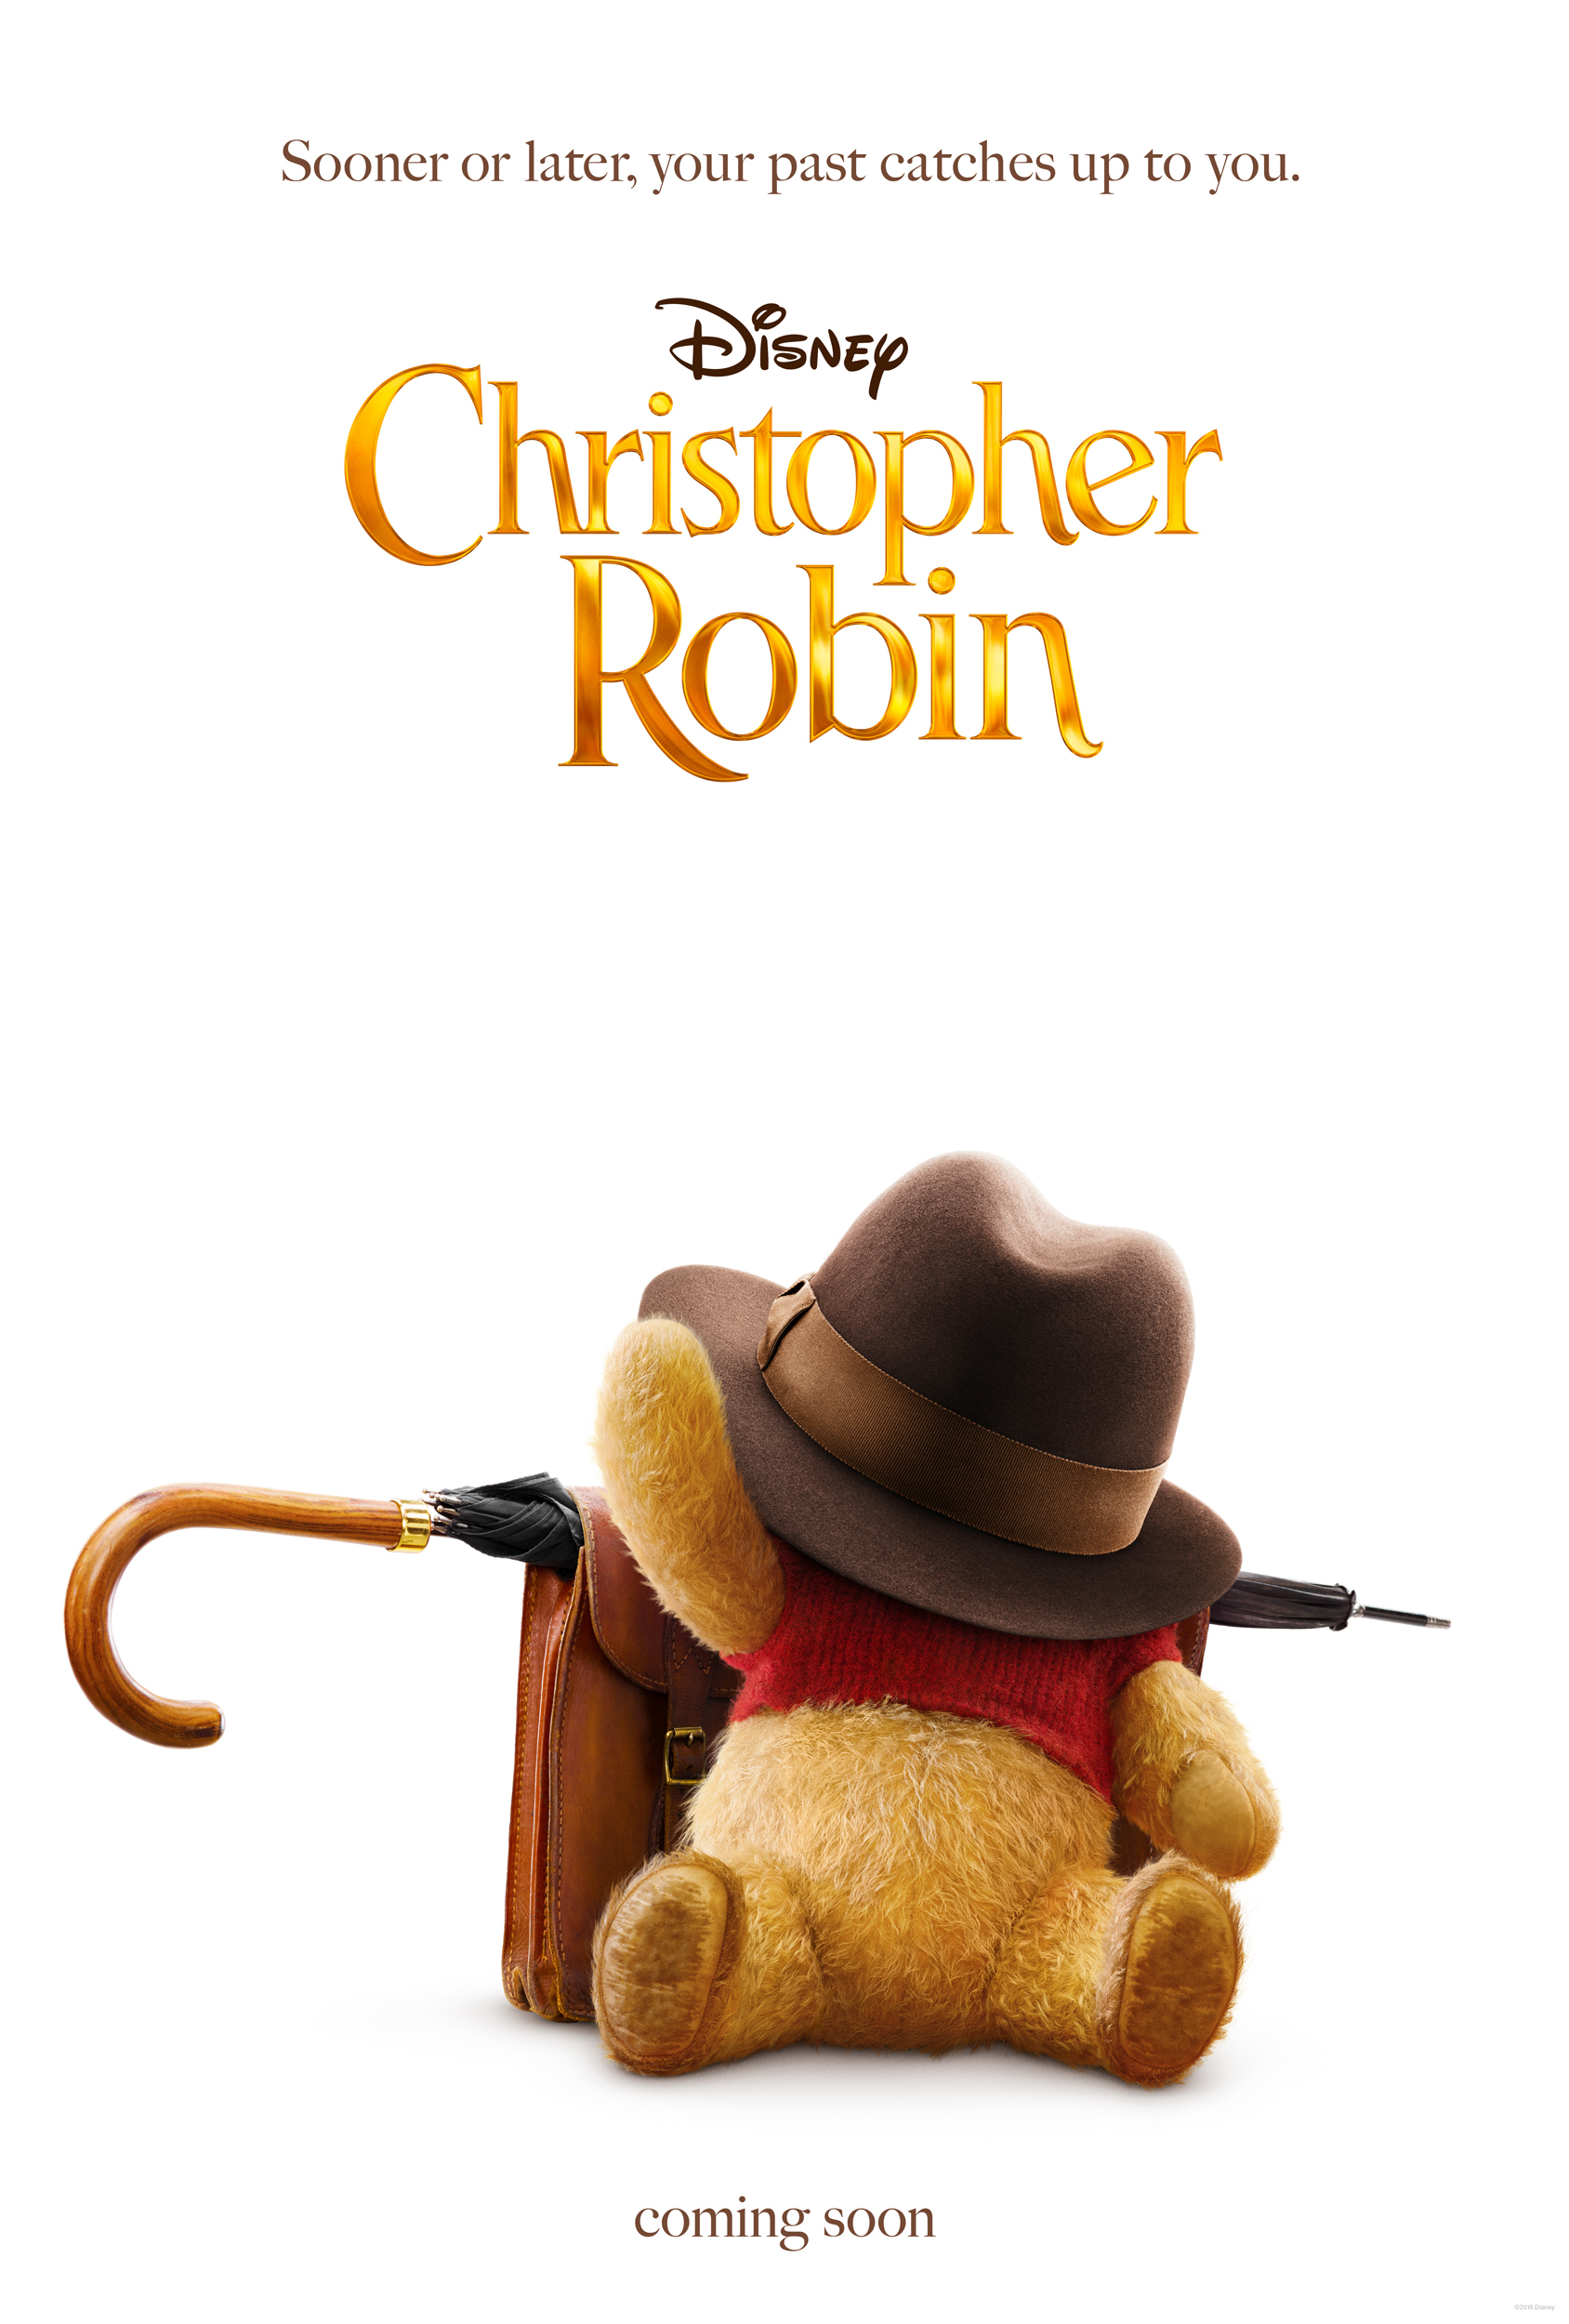 Christopher Robin – Why You Should Go and Take the Grandchildren